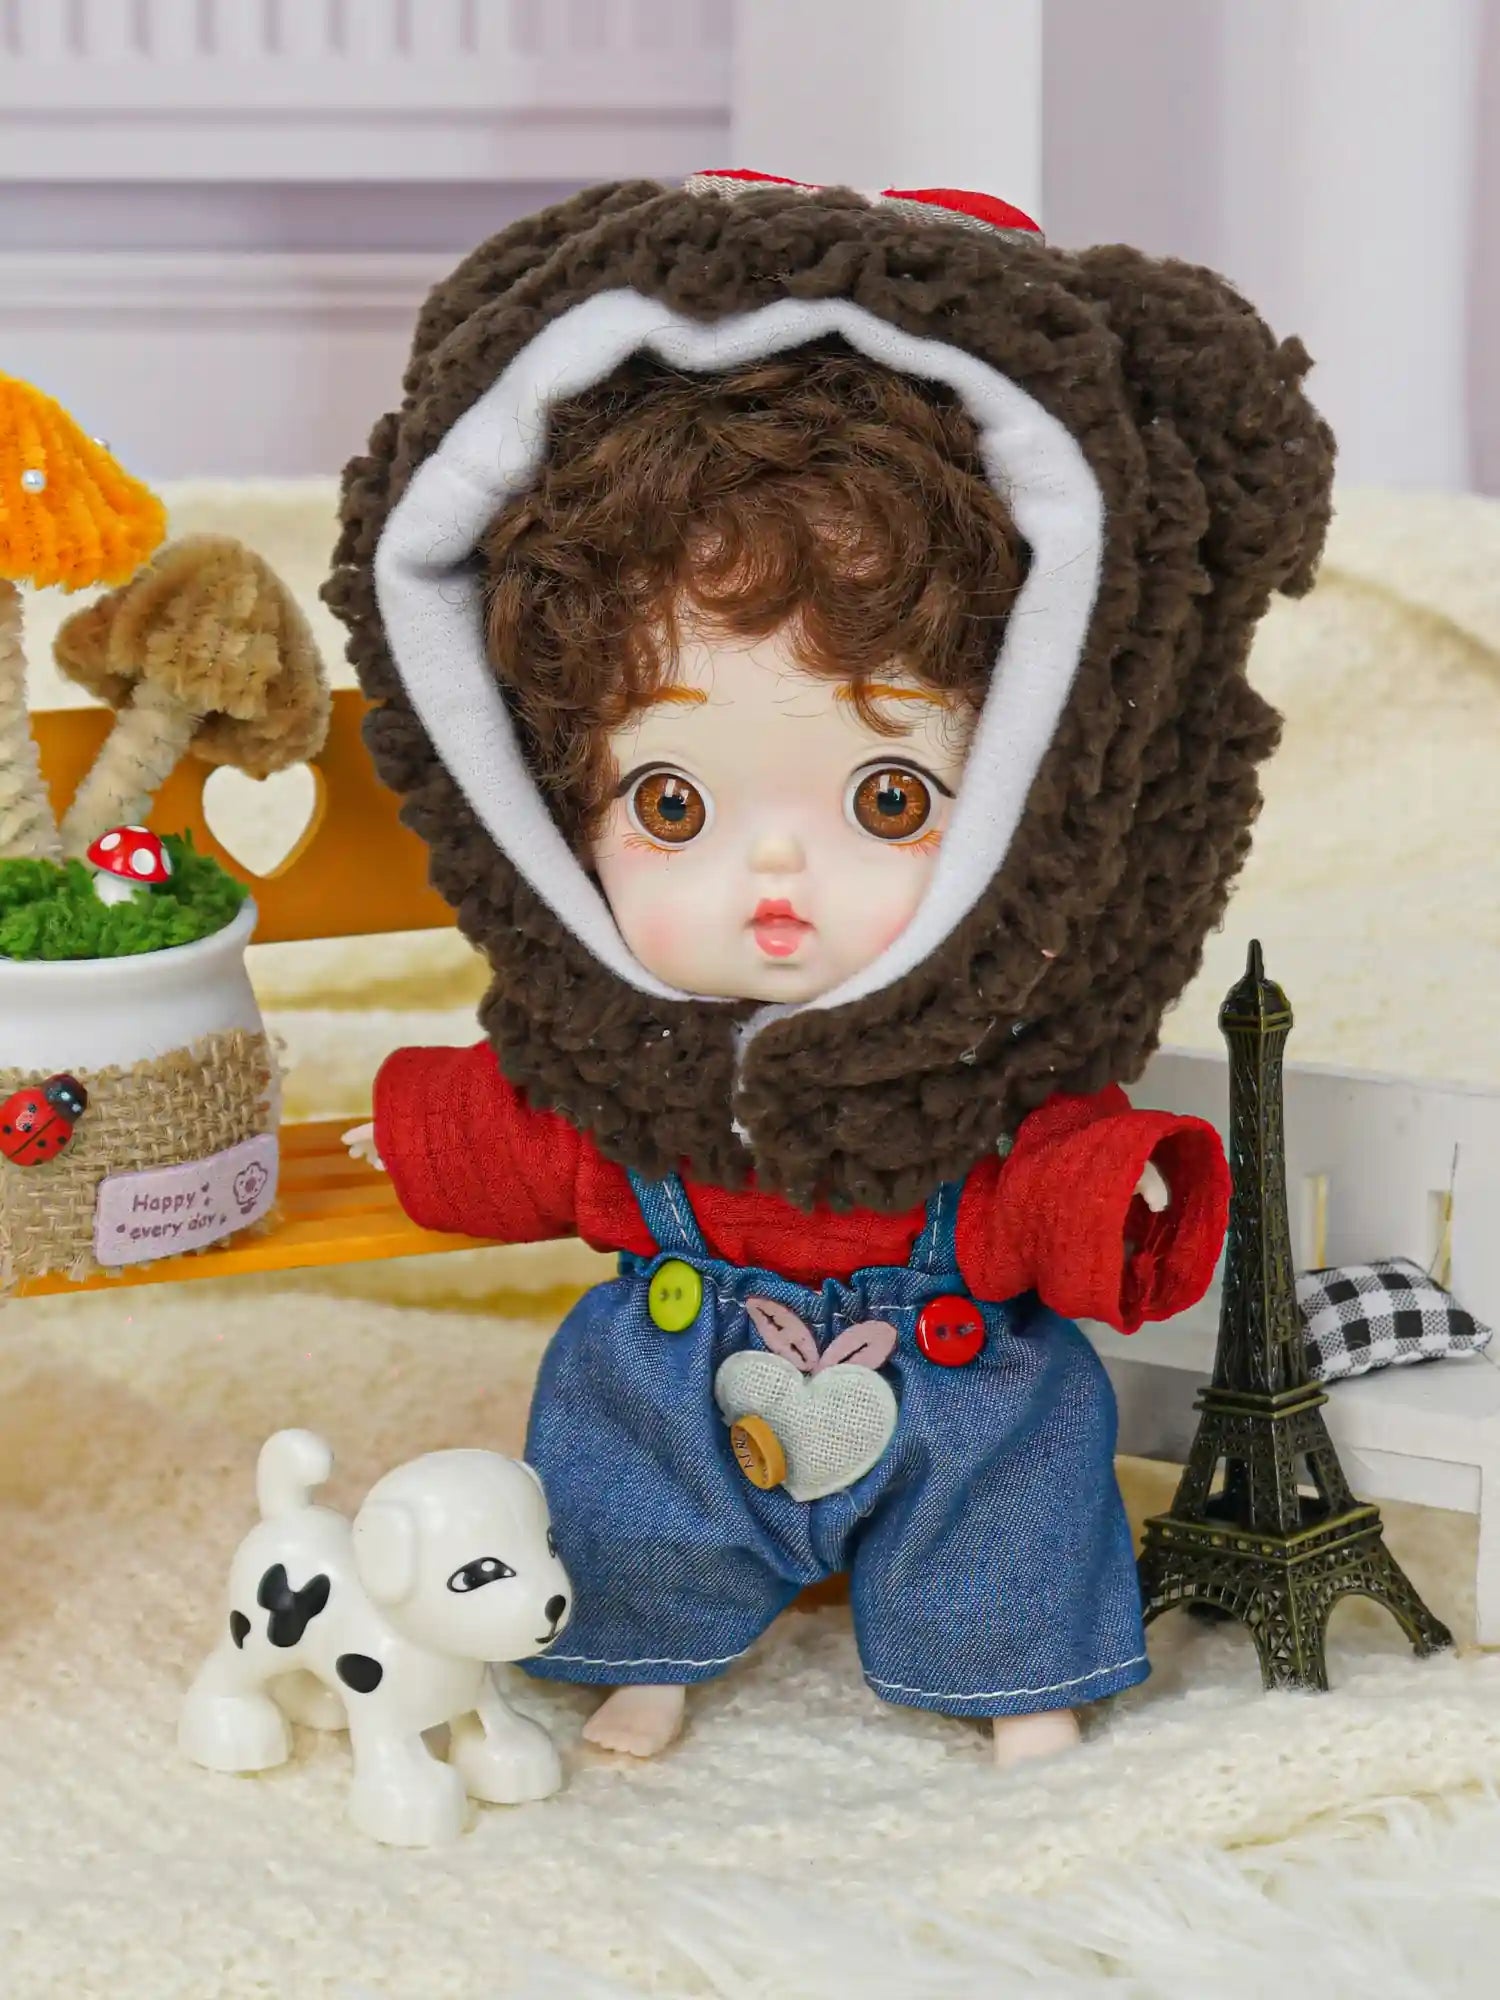 A ball-jointed doll with a teddy bear hat and bright eyes, posing with a mini Eiffel Tower and a small dog statue.